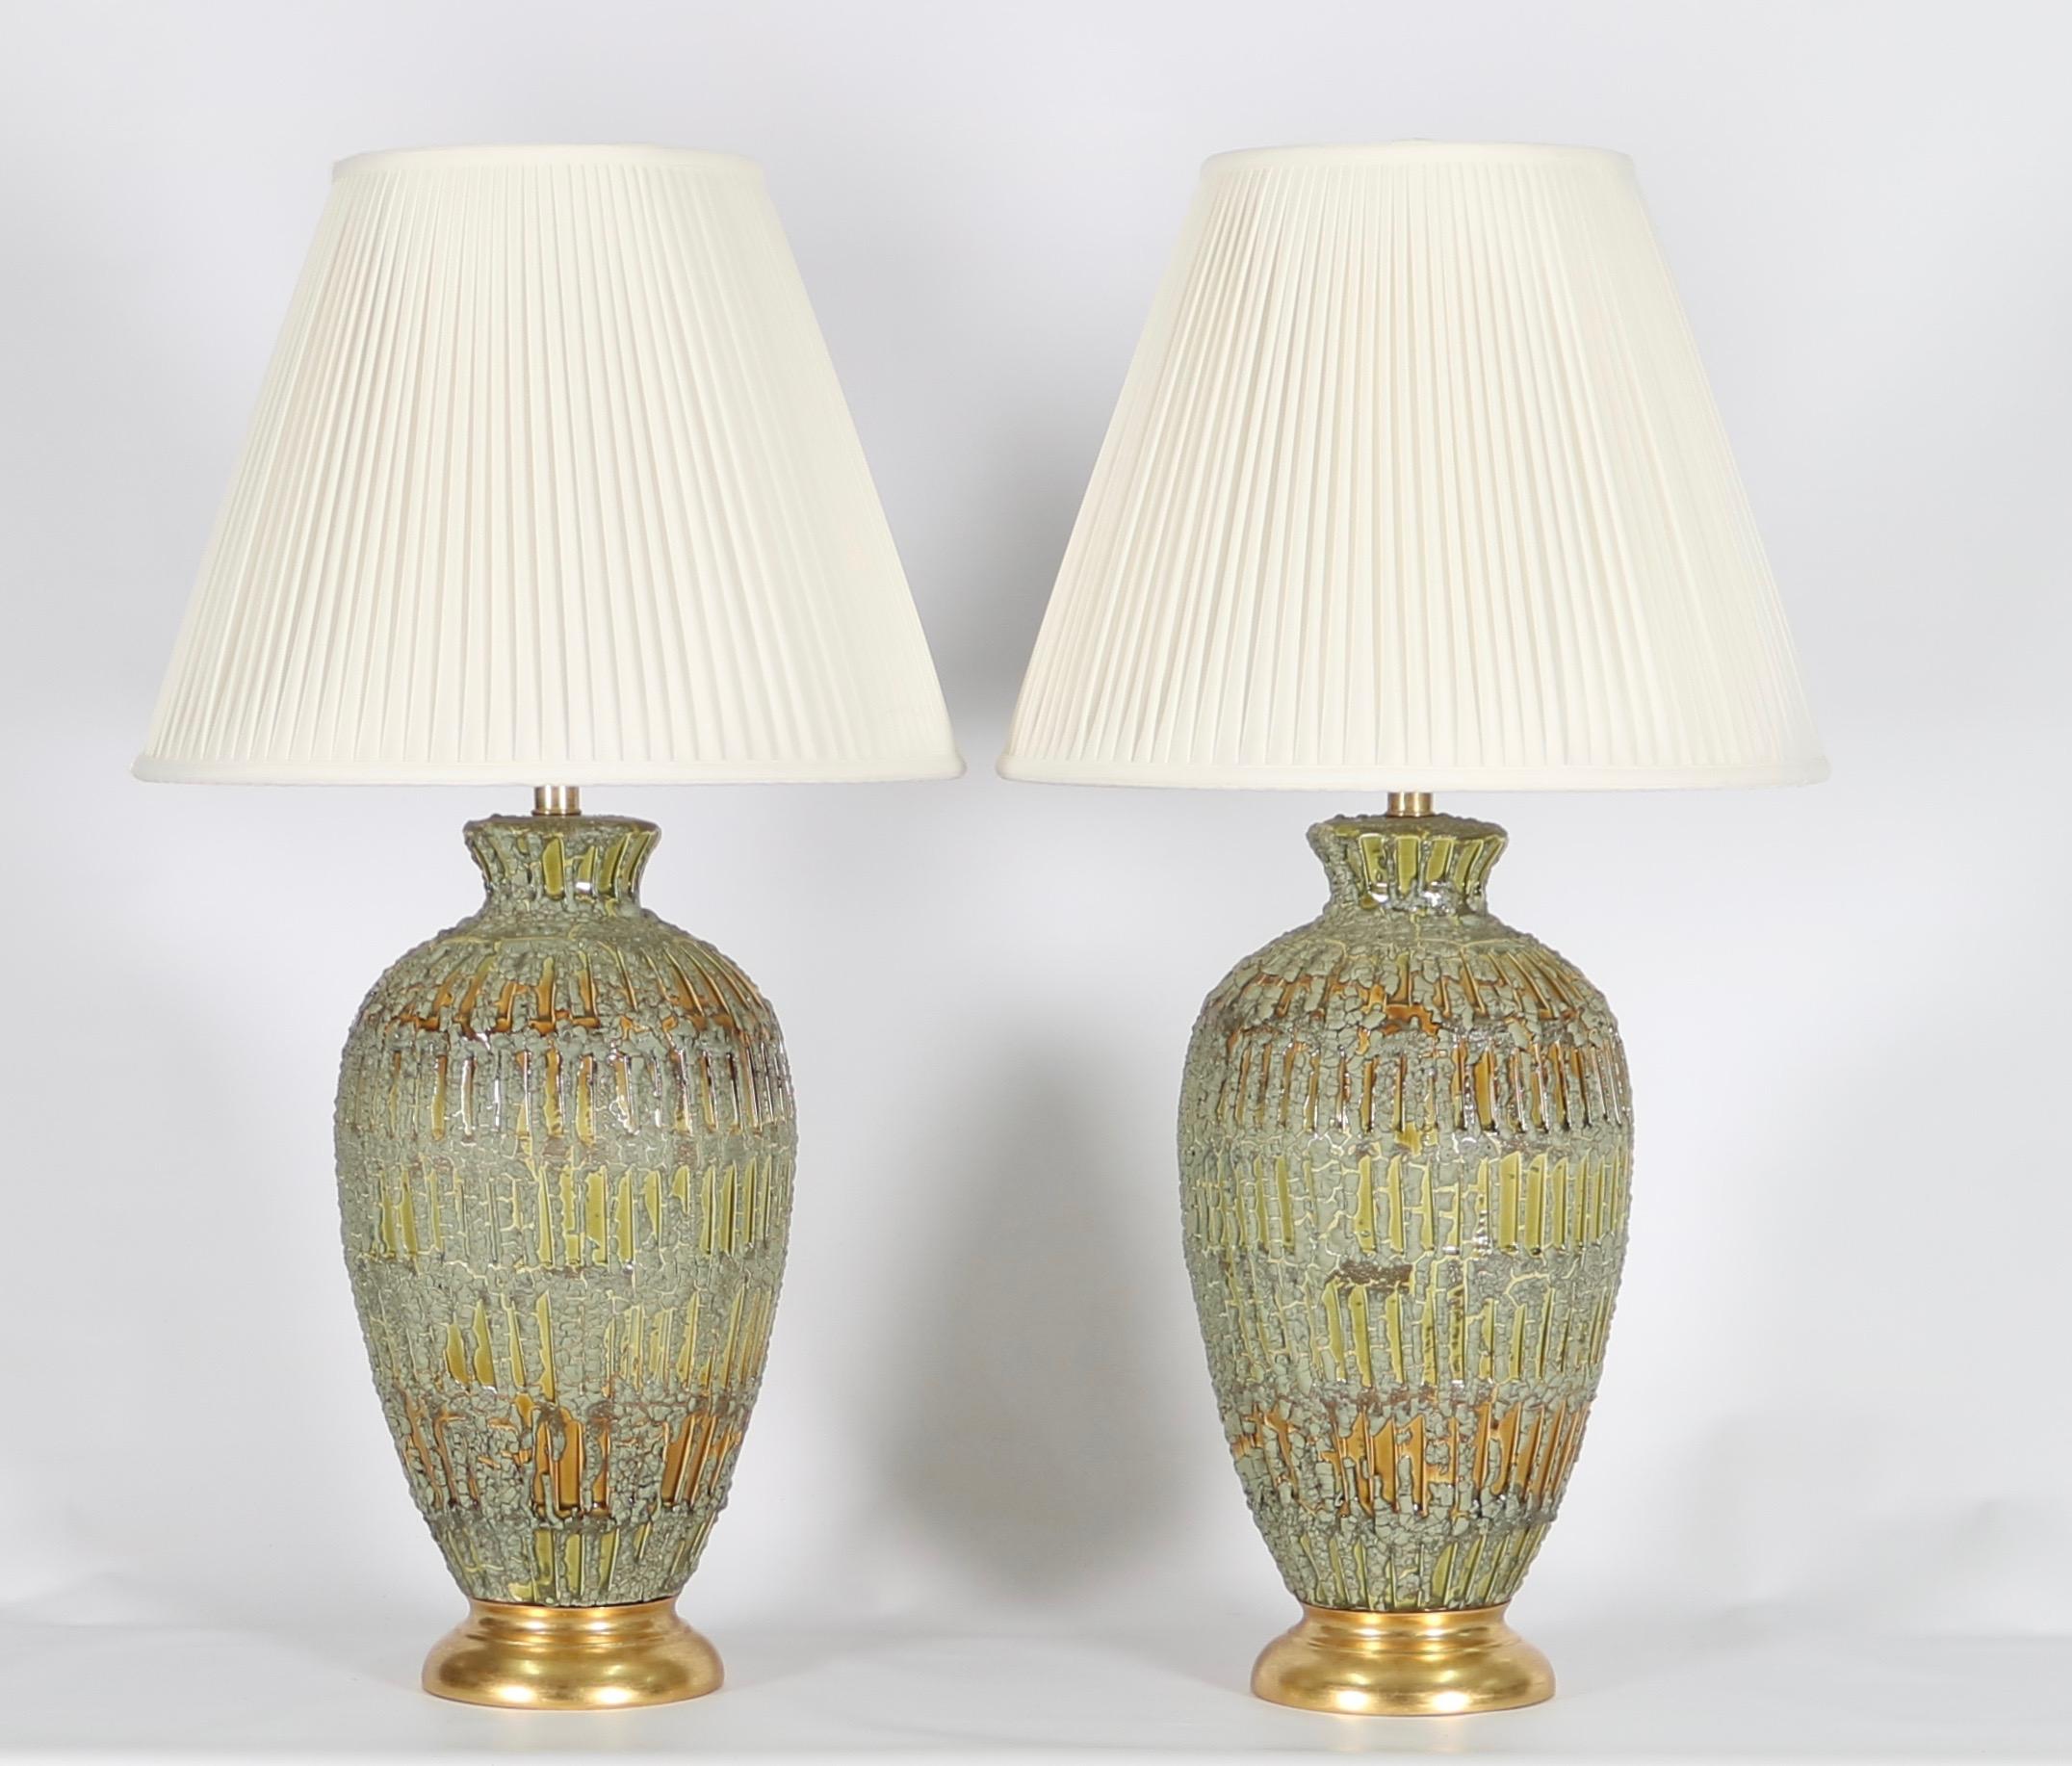 Mid-20th Century Italian Hollywood Regency Lamps Lava Glazed in Green and Gold Tones